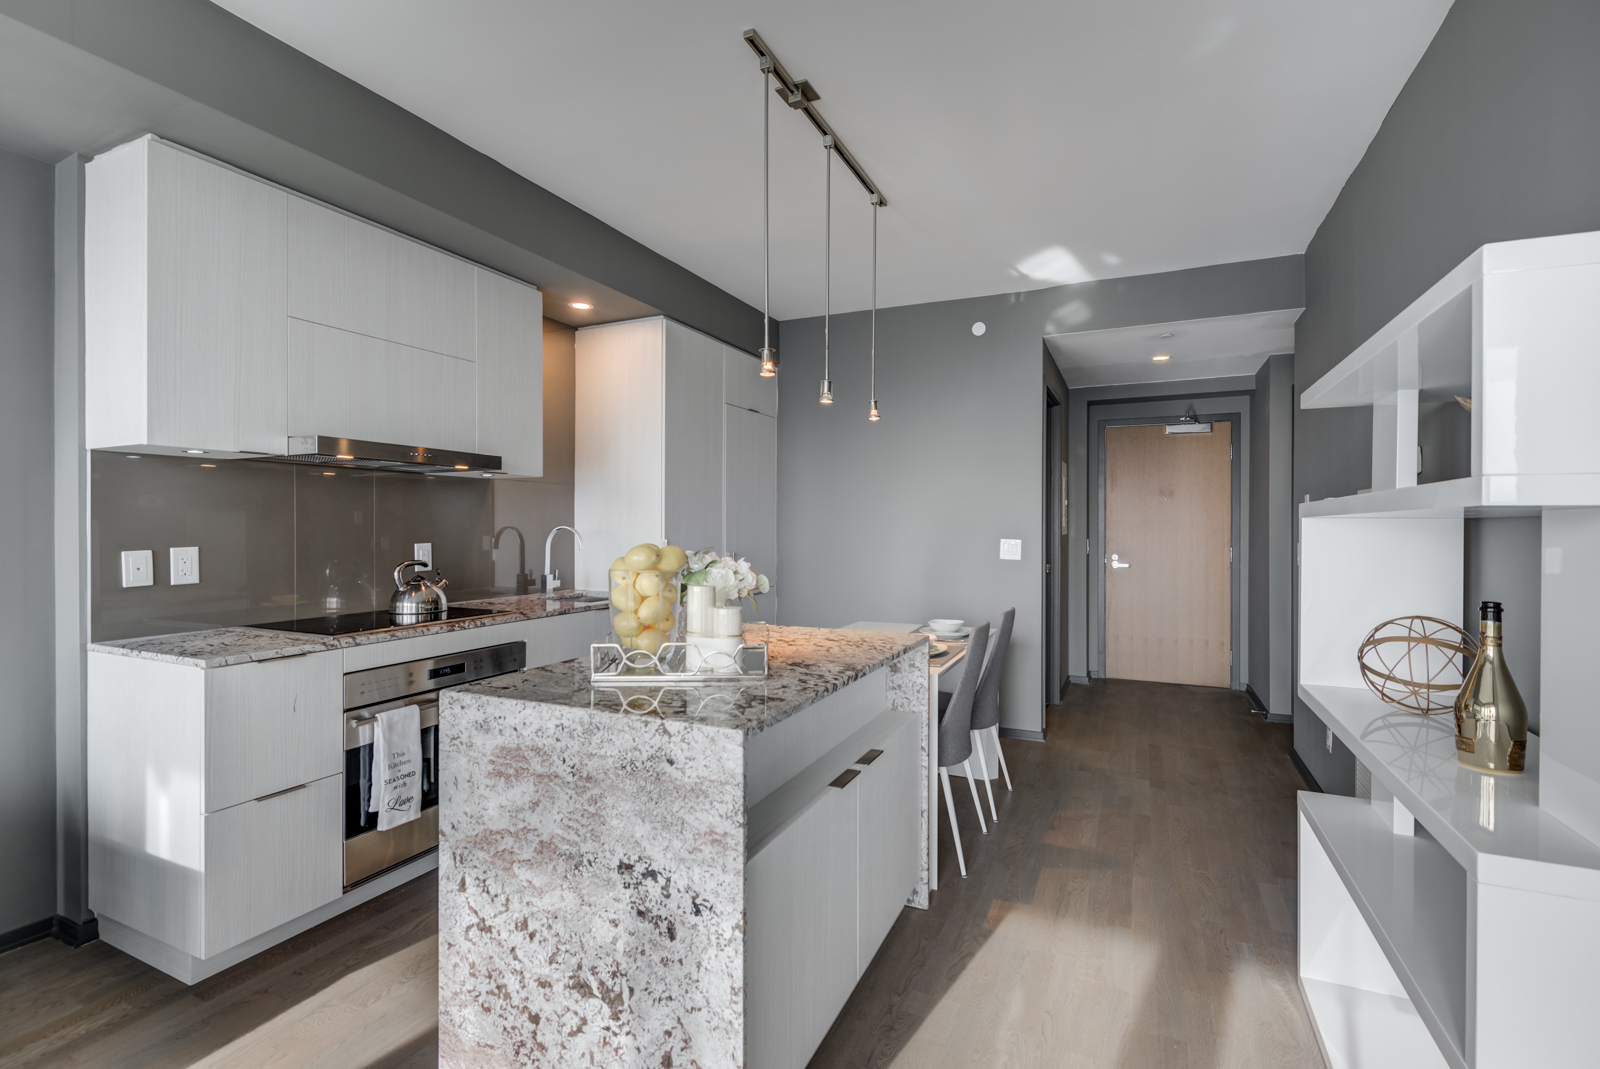 Modern kitchen of 1 Bloor St E Unit 4305 with granite counters, island, pendant lights and wooden cabinets.